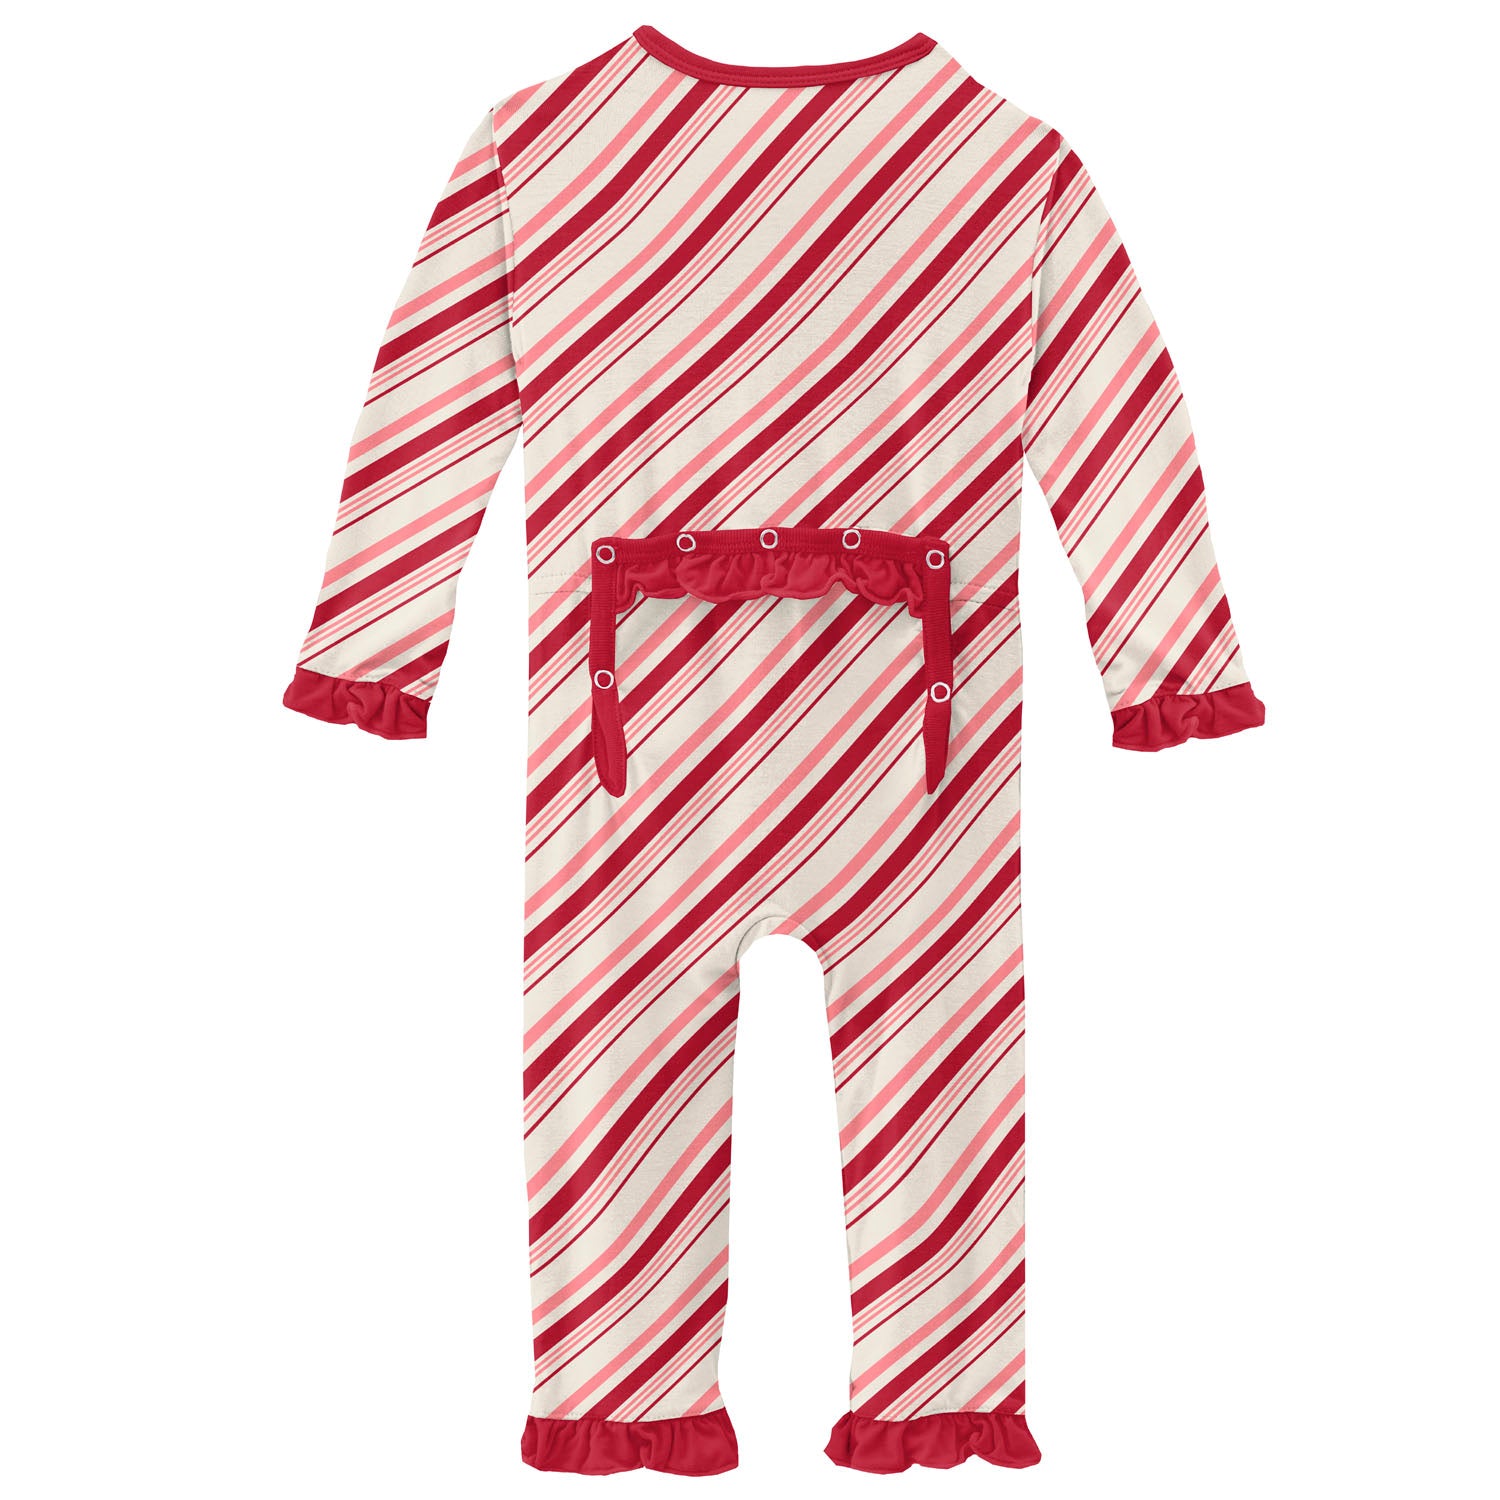 Kickee Pants Holiday Bamboo Ruffle Coverall with Snaps - Strawberry Candy Cane Stripe